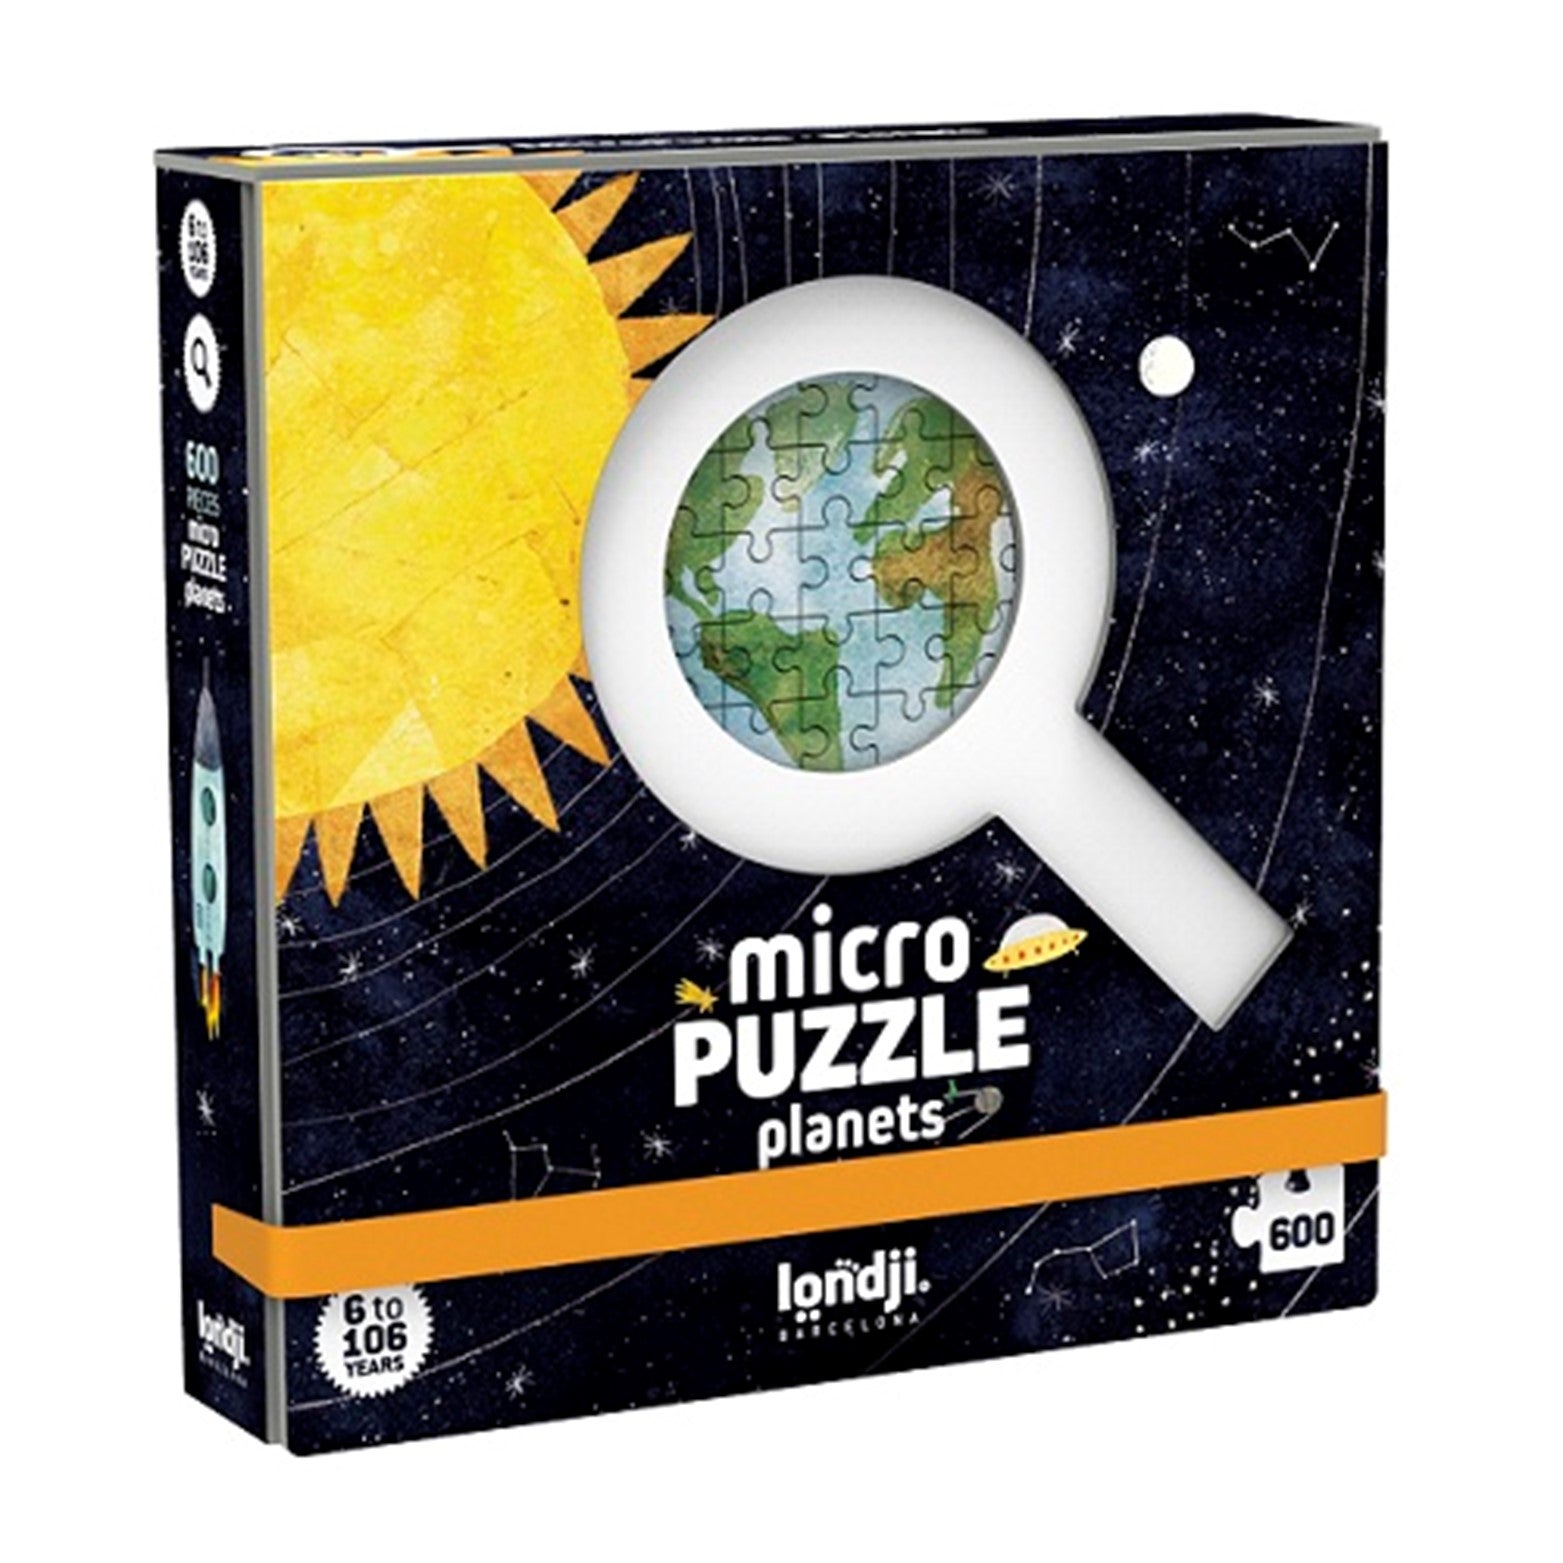 Discover the Planets - Micropuzzle 600pc